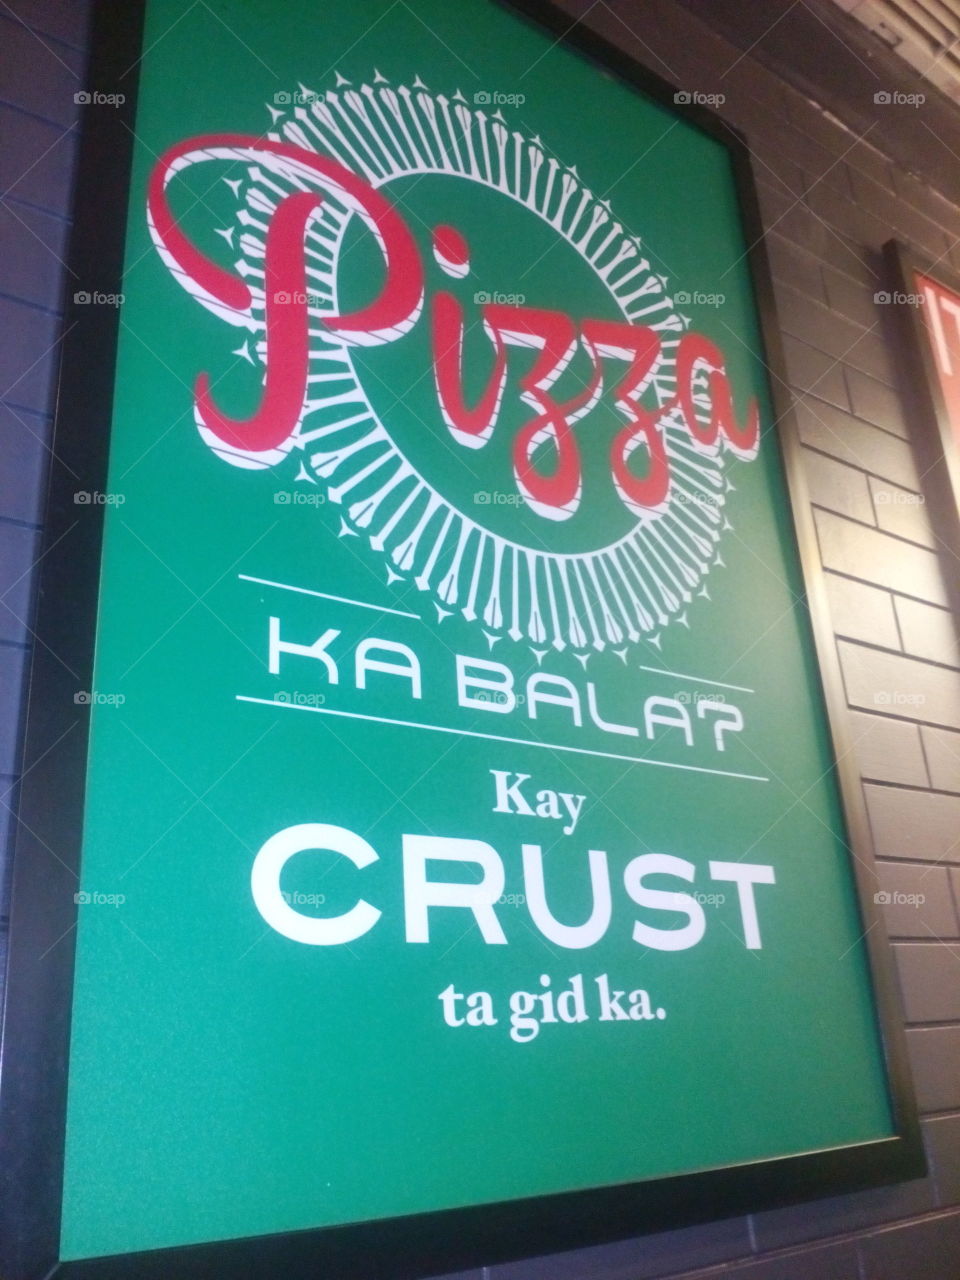 love this photo from Greenwich pizza in Philippines the worlds leading pizza,., pinoys love pizza hope you also love pizza. The message shows how Filipinos admire people from all walks of life who are beautiful inside and out.. 

Just give in. Greenwich pizza here in pH.

See you here hope you love the messages they post at the wall.